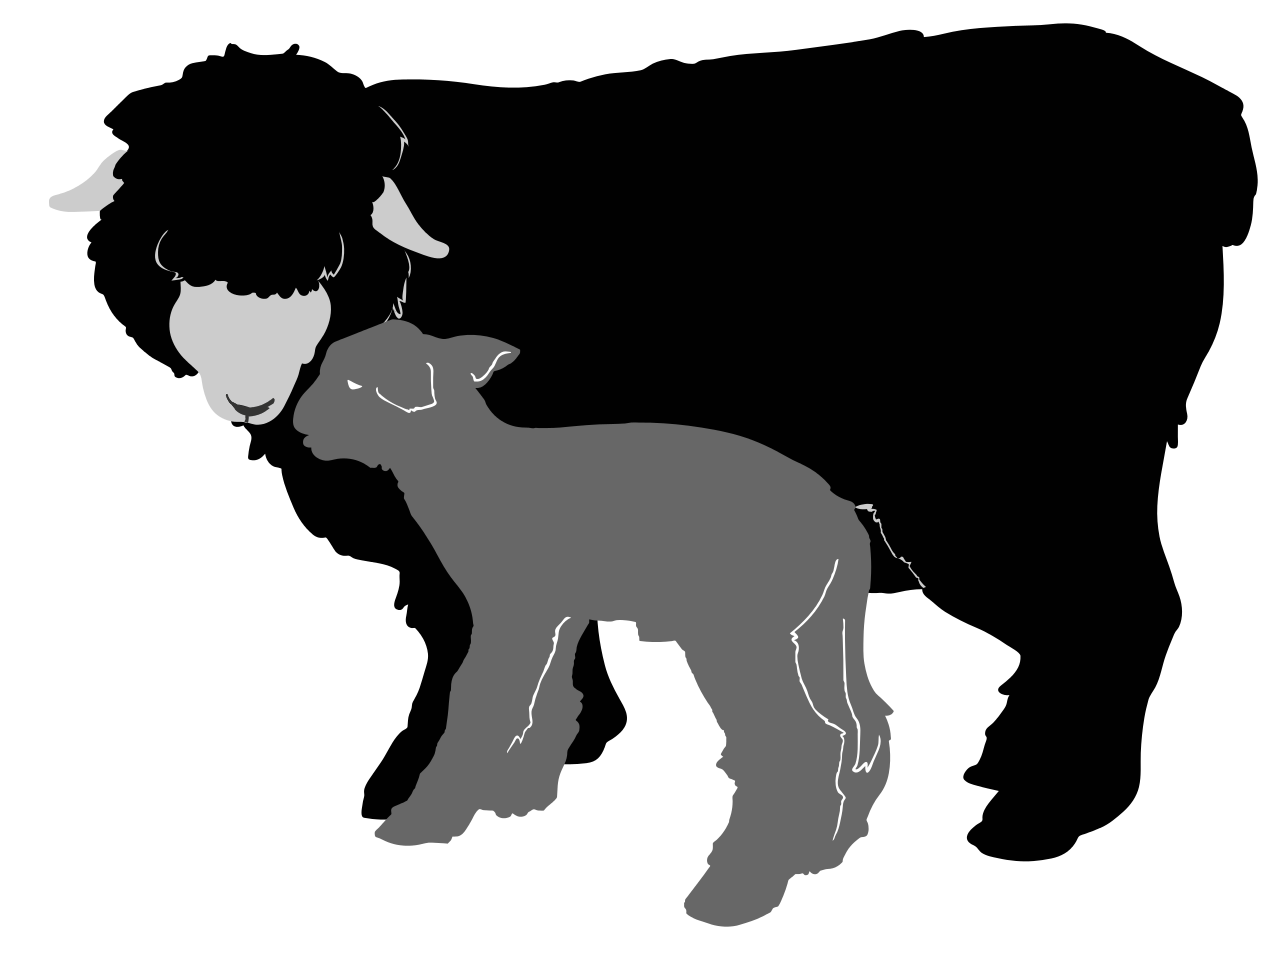 Sheep clipart silhouette. Clip art at getdrawings